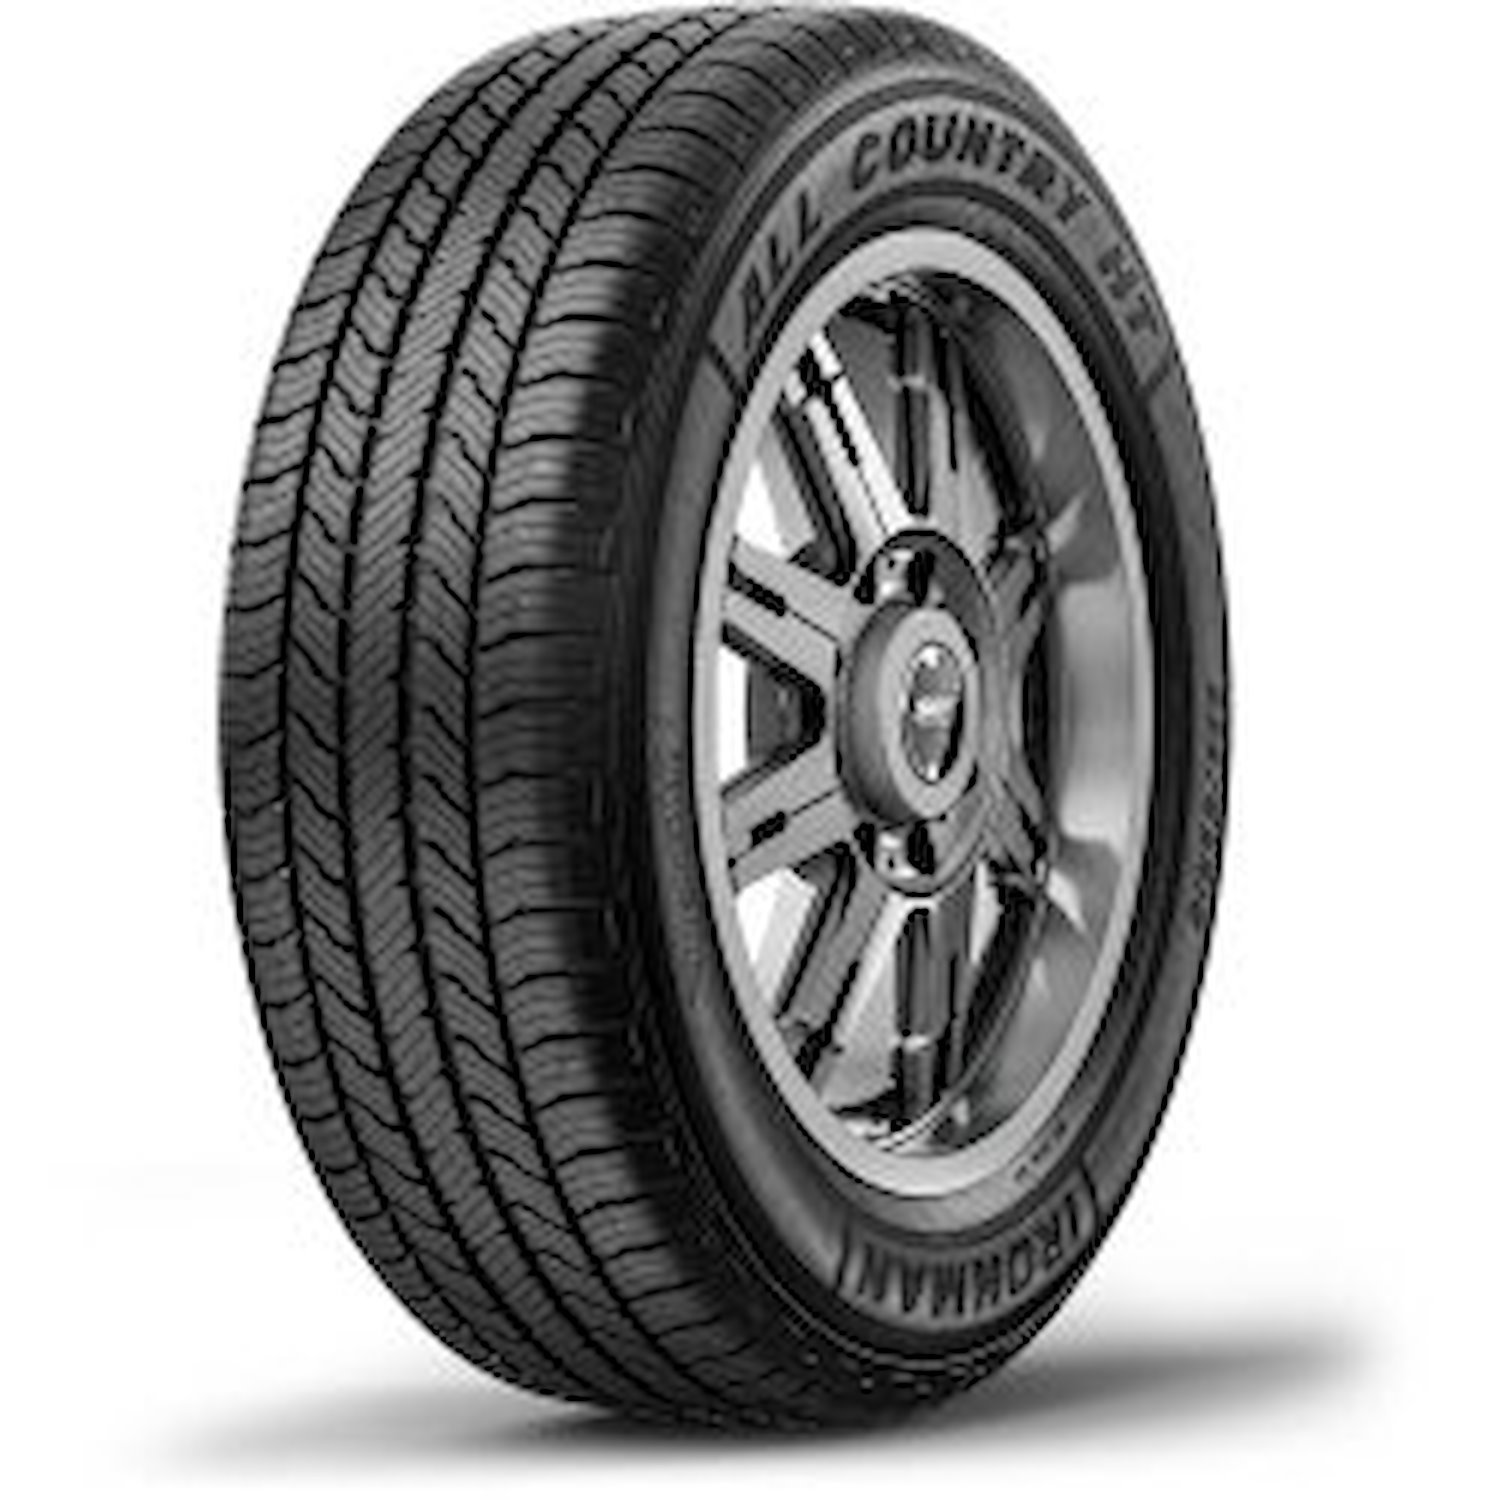 03049 All Country HT Tire, LT245/75R16, 120/116S